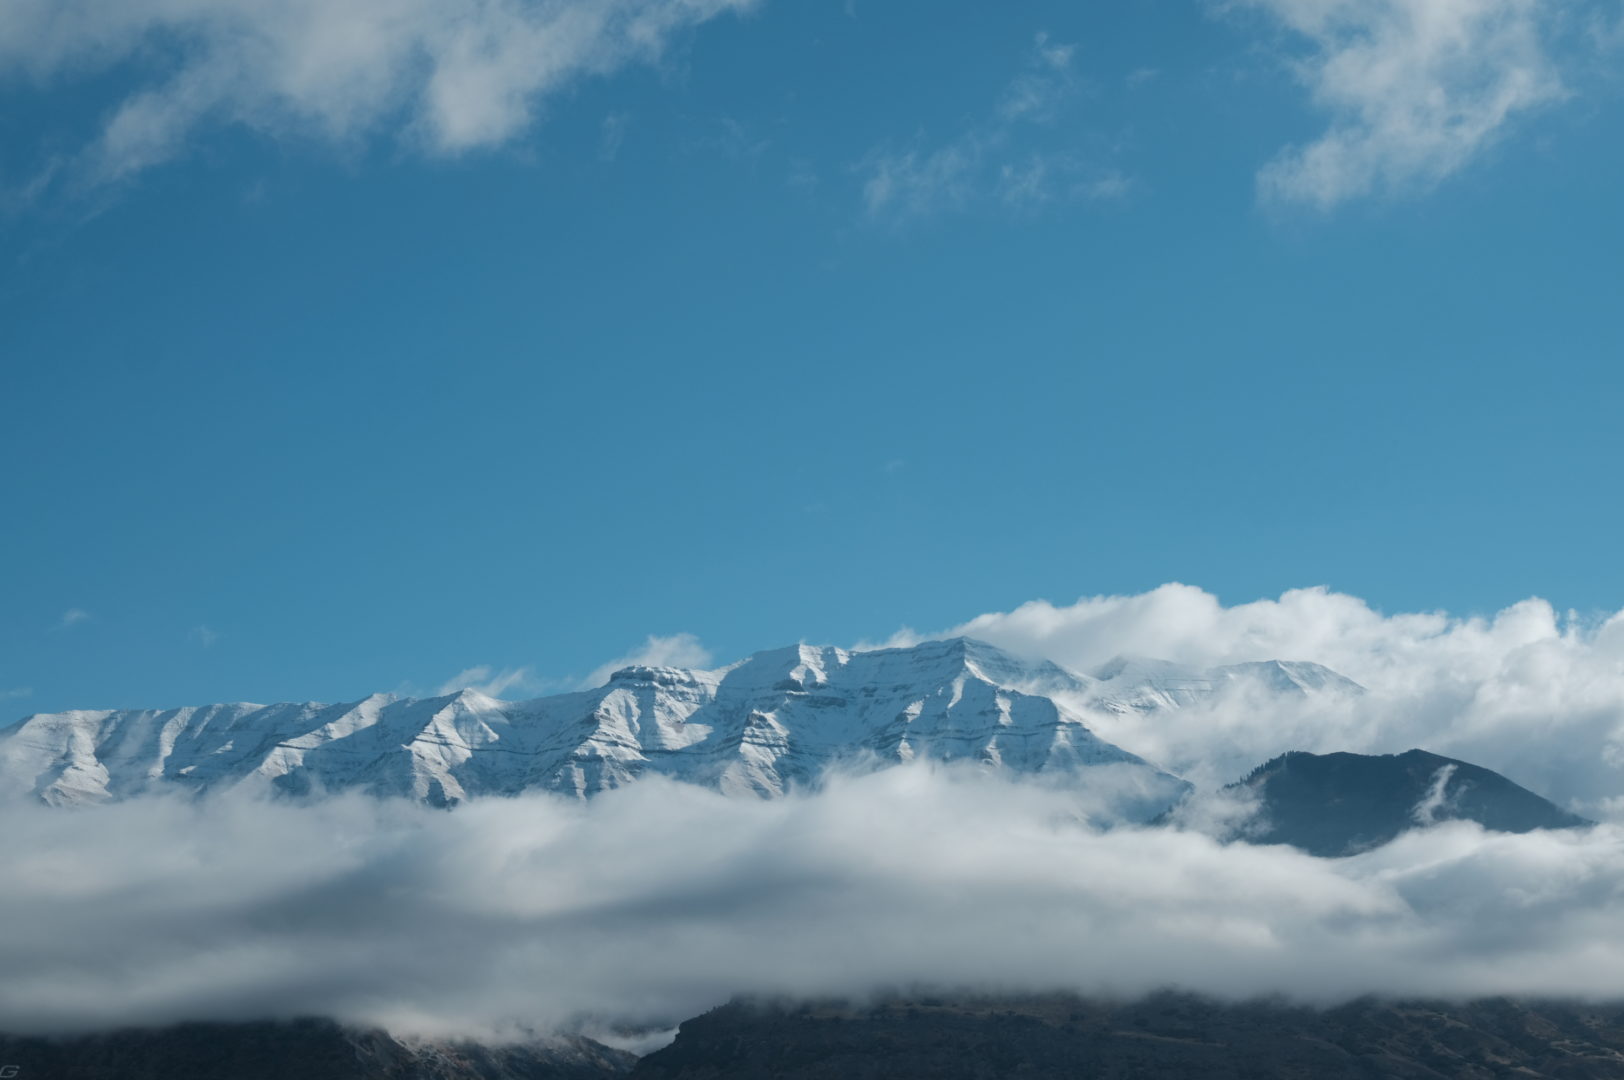 A light layer of snow covers the top of Mt Timpanogos as it's flanked by scattered fluffy clouds and a blue morning sky.